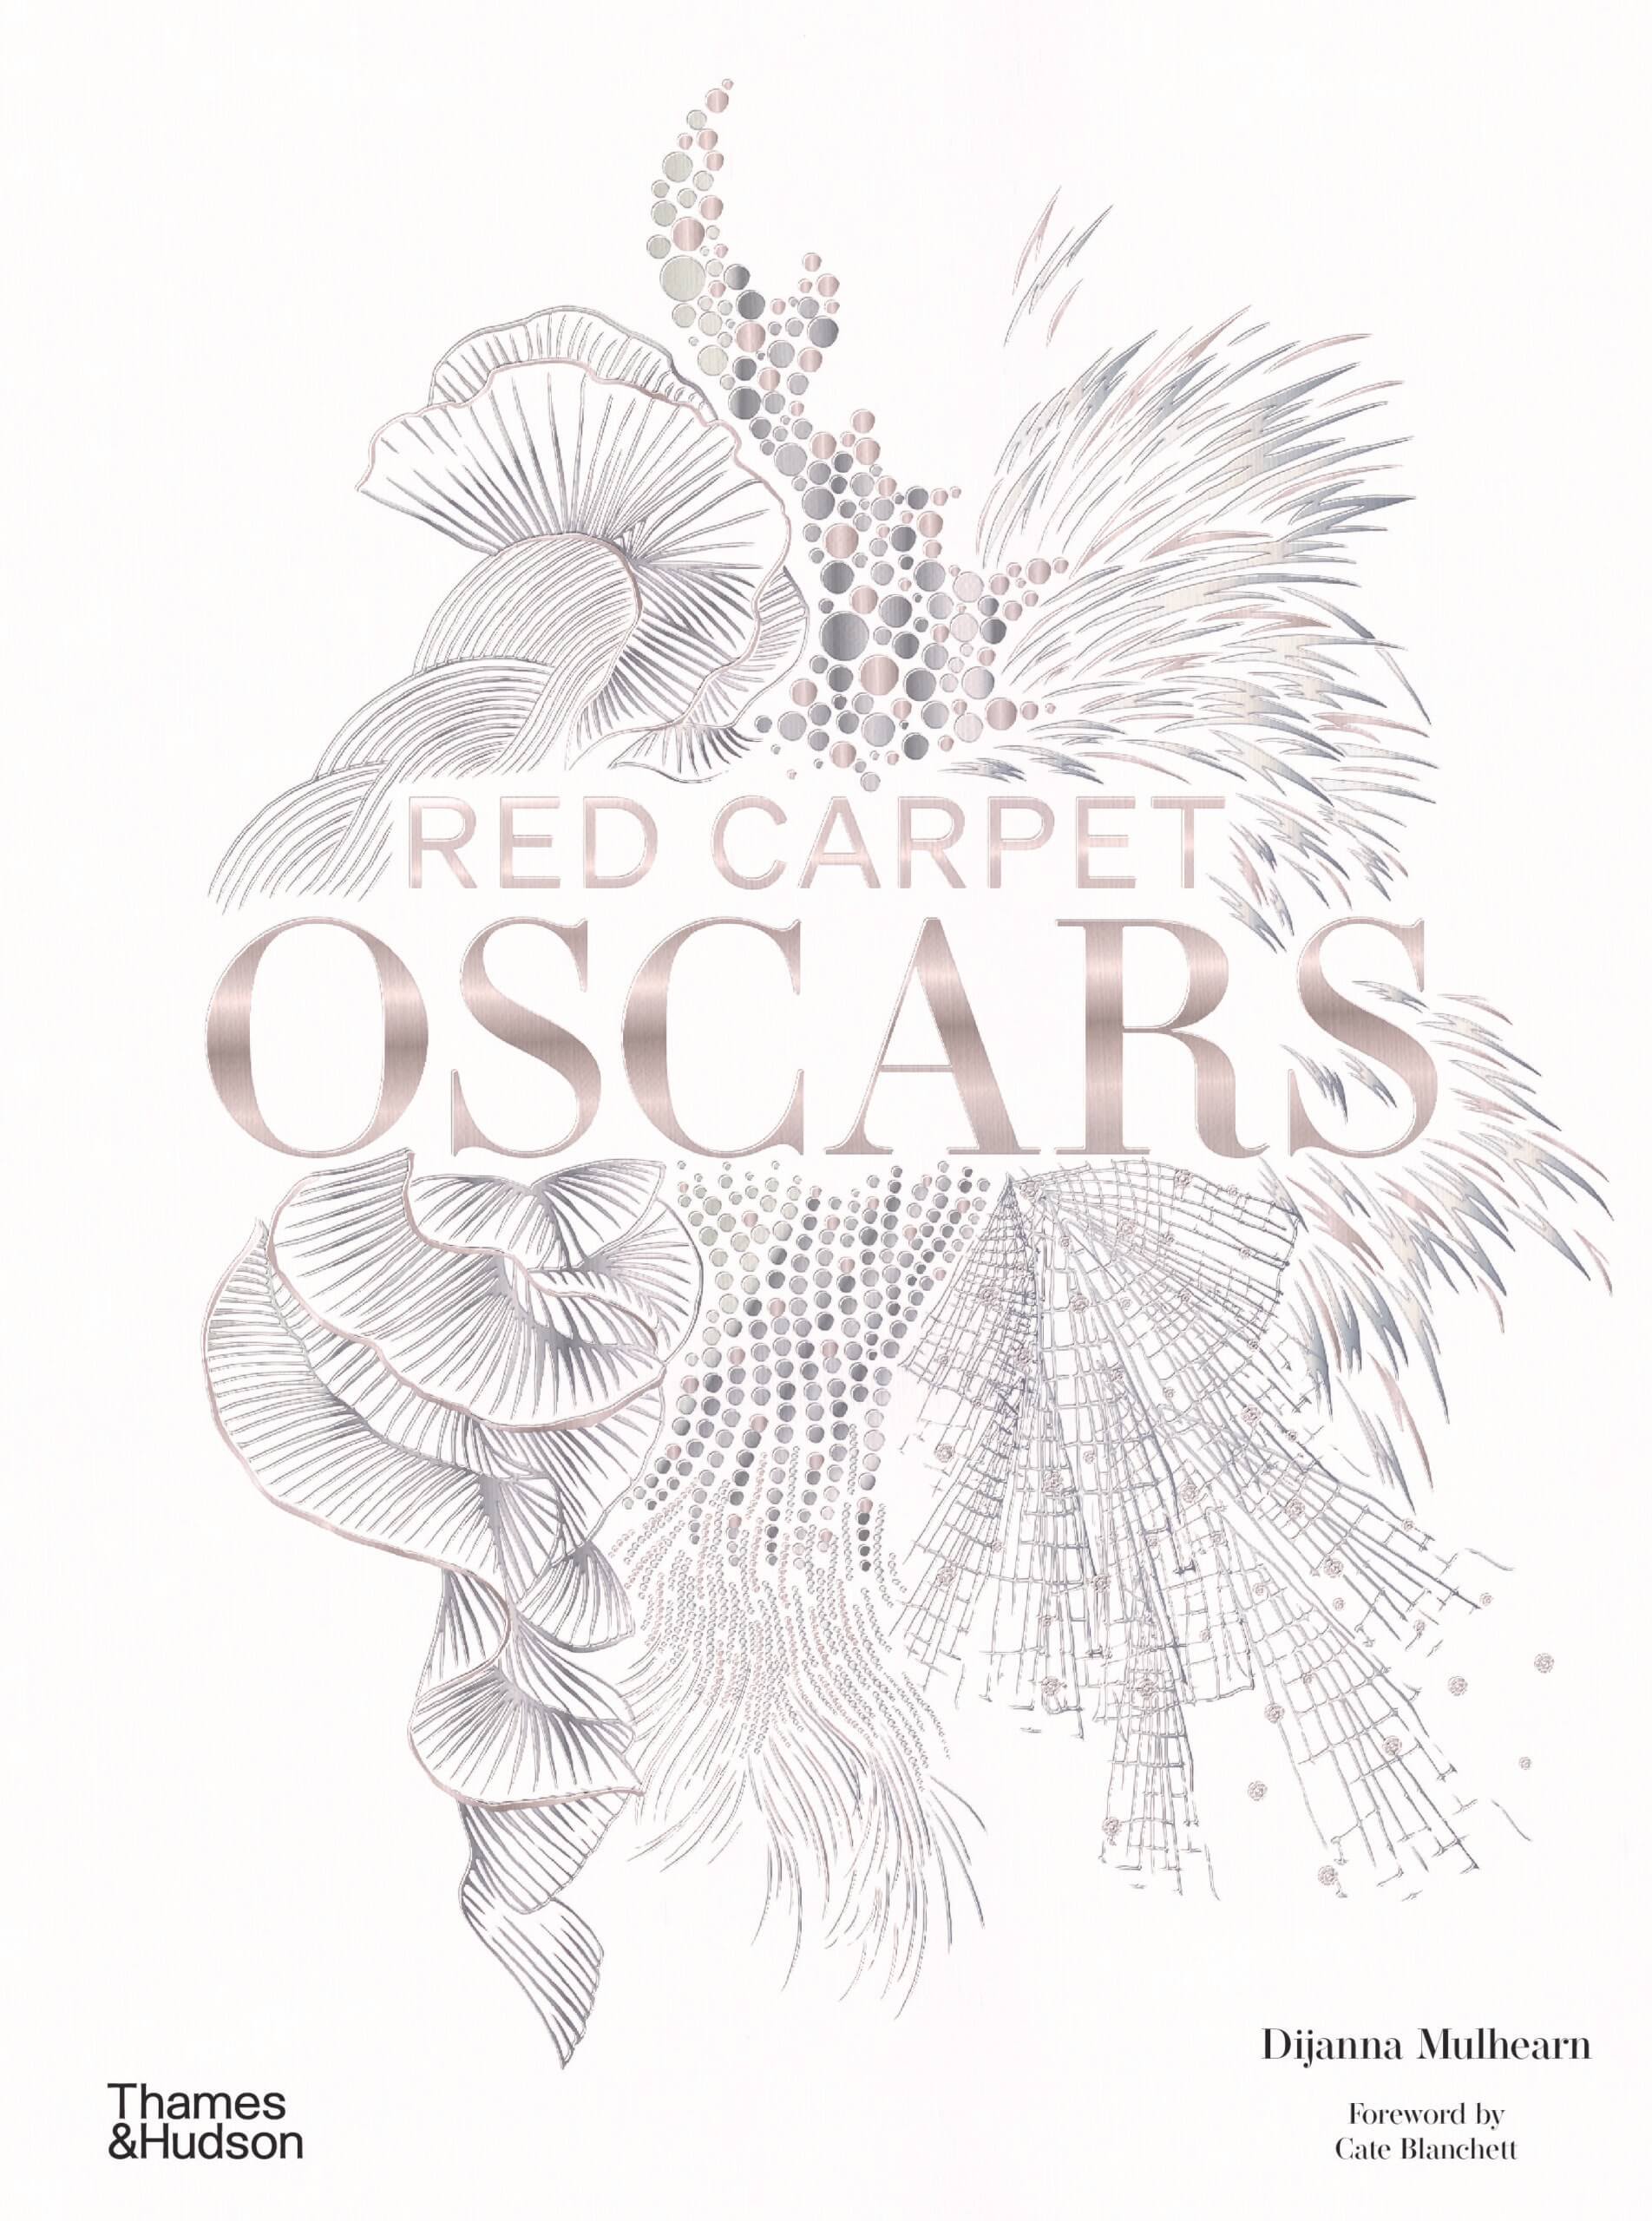 cover image of red carpet oscars, written in metallic, pale, serif font. White cover with decorative, silver, garment adornments depicted